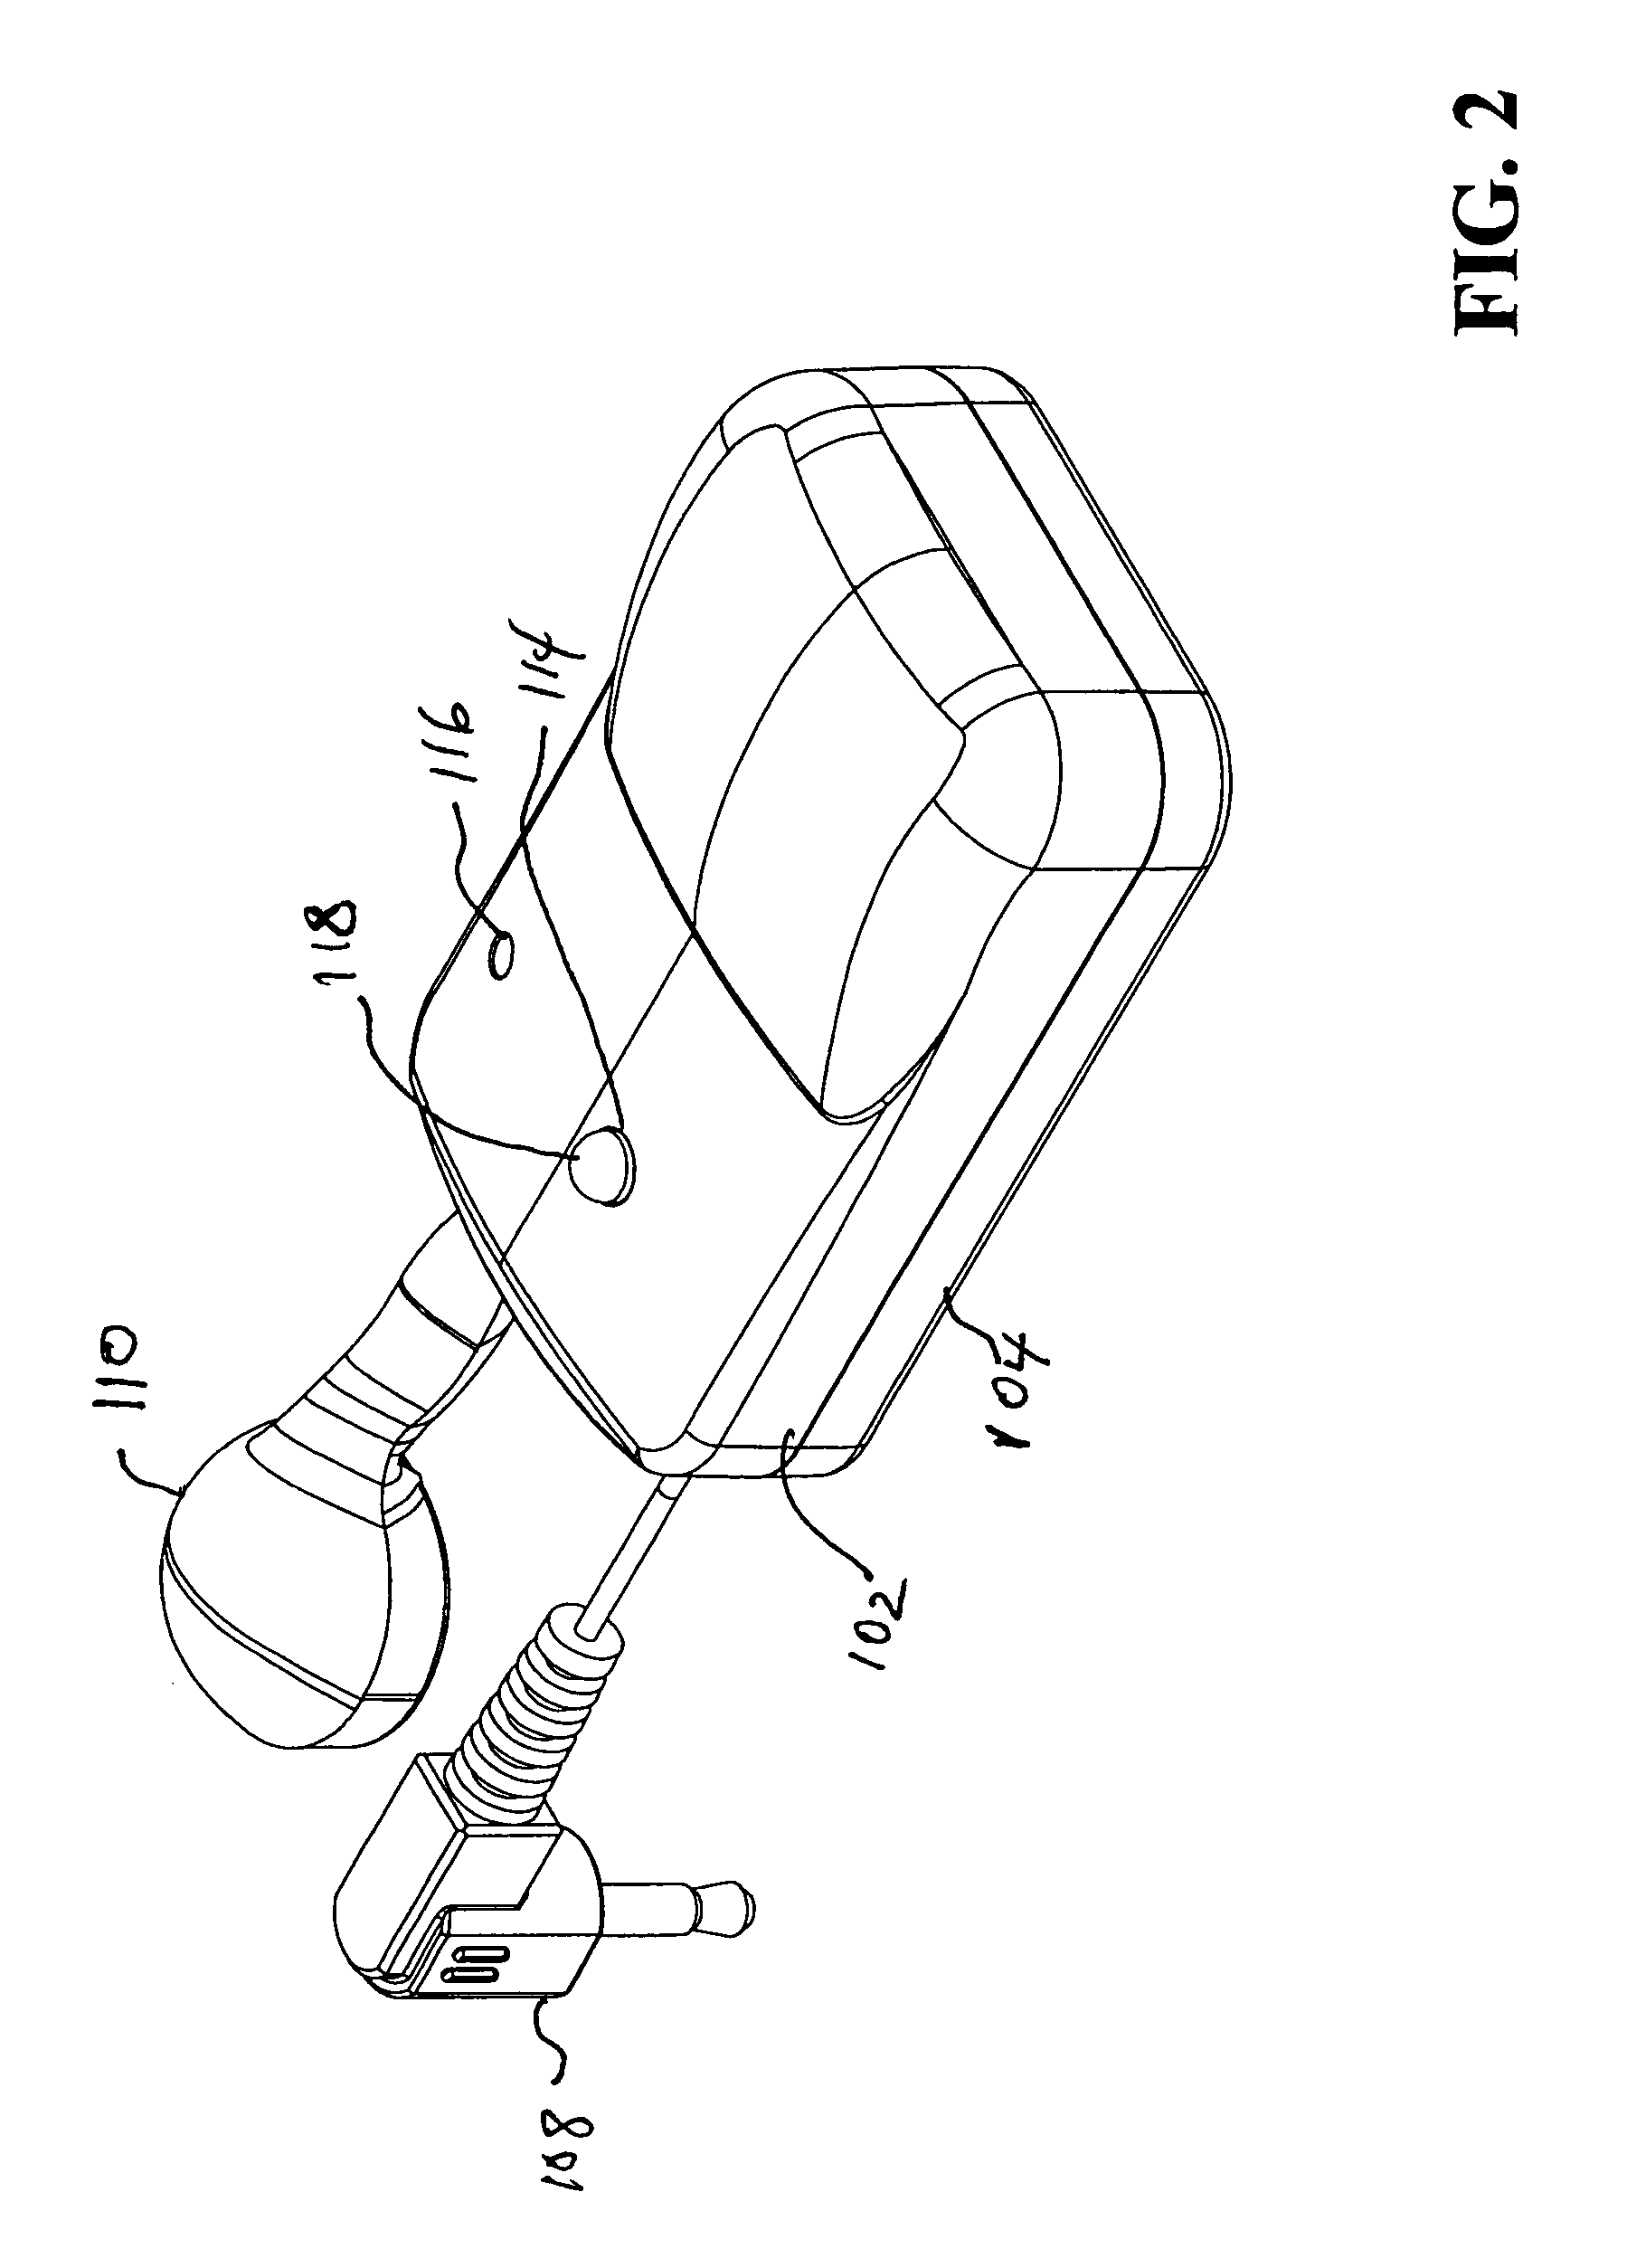 Headset cable retraction system